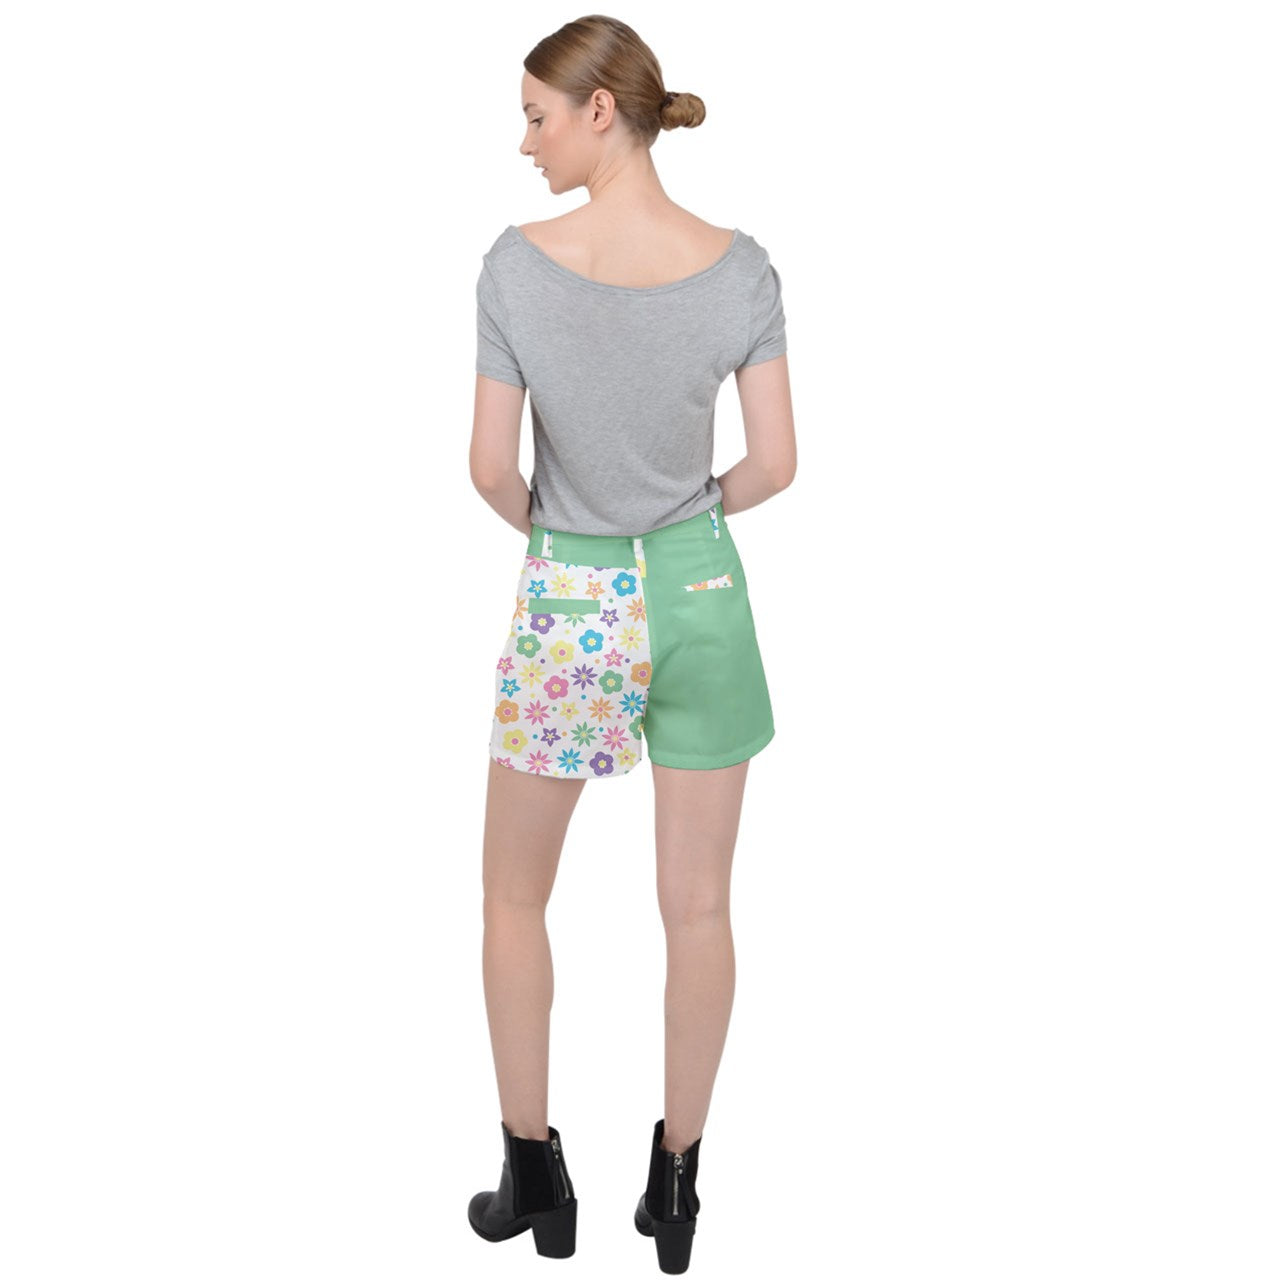 Retro Flowers Ripstop Shorts - White with Green Accents